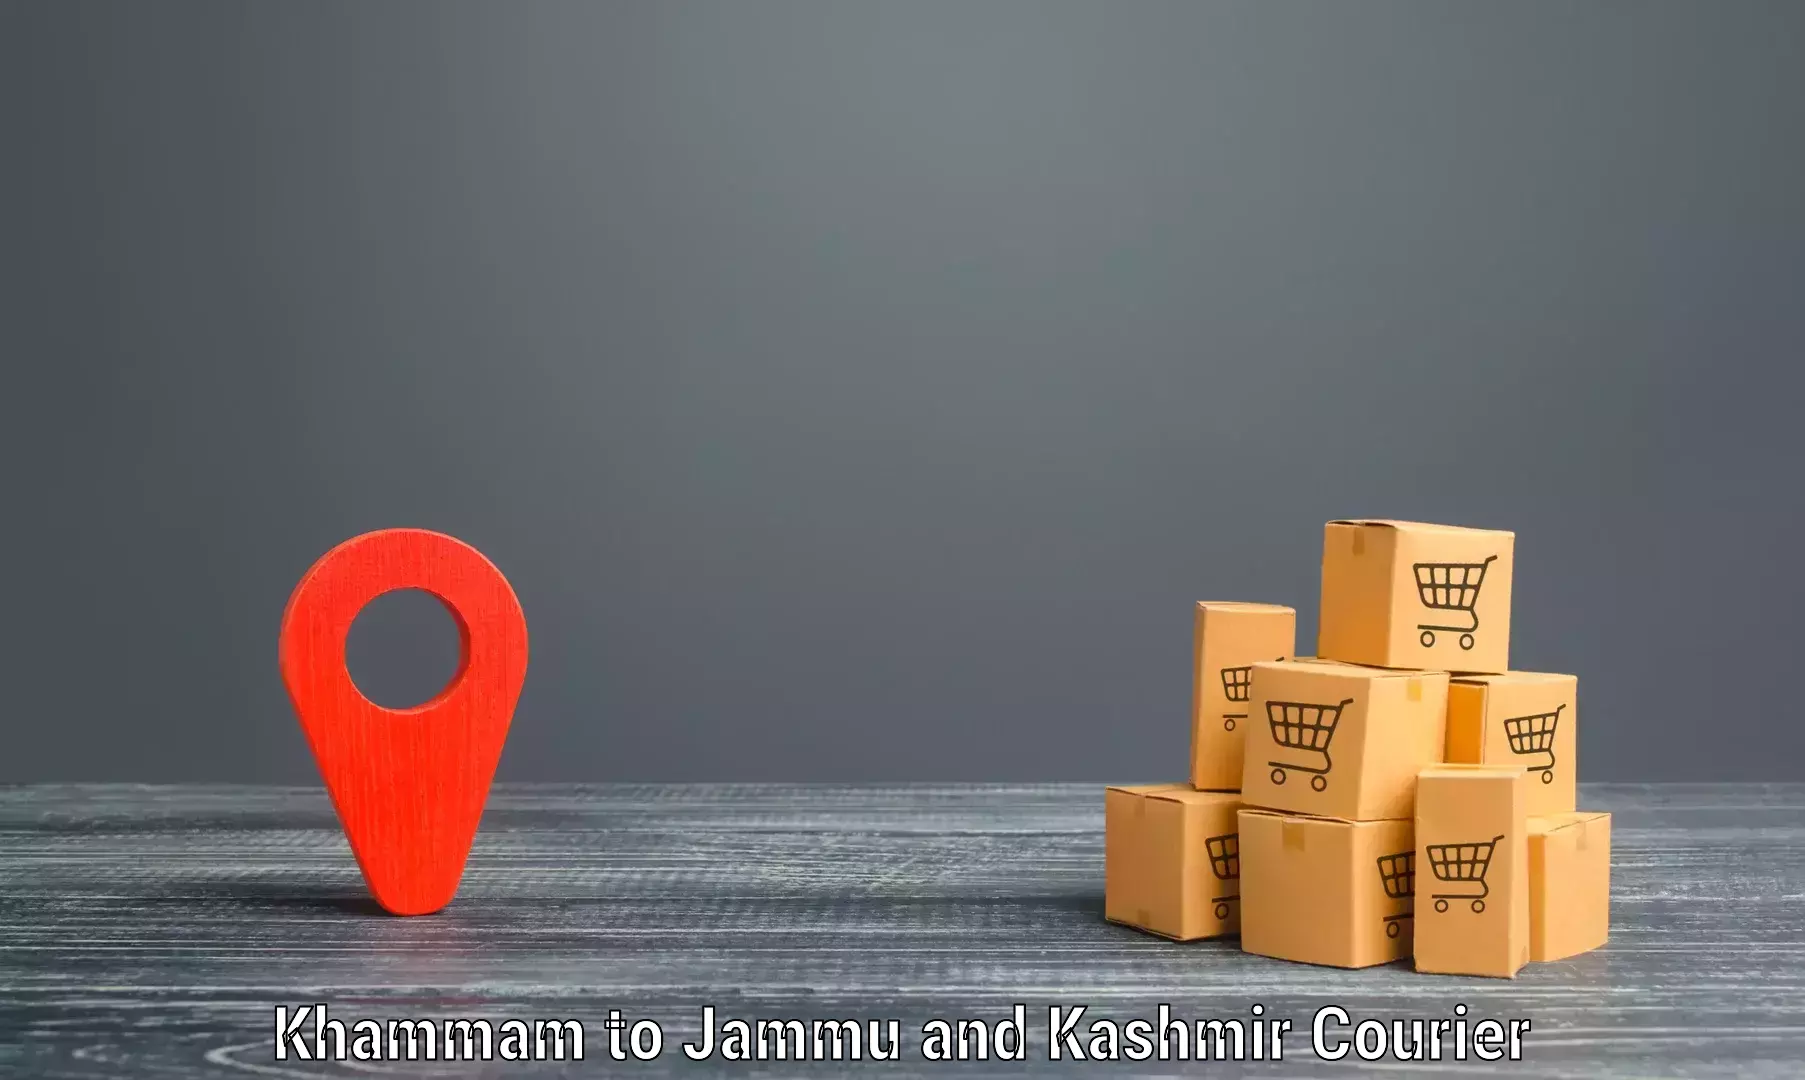 Same-day delivery options Khammam to Rajouri